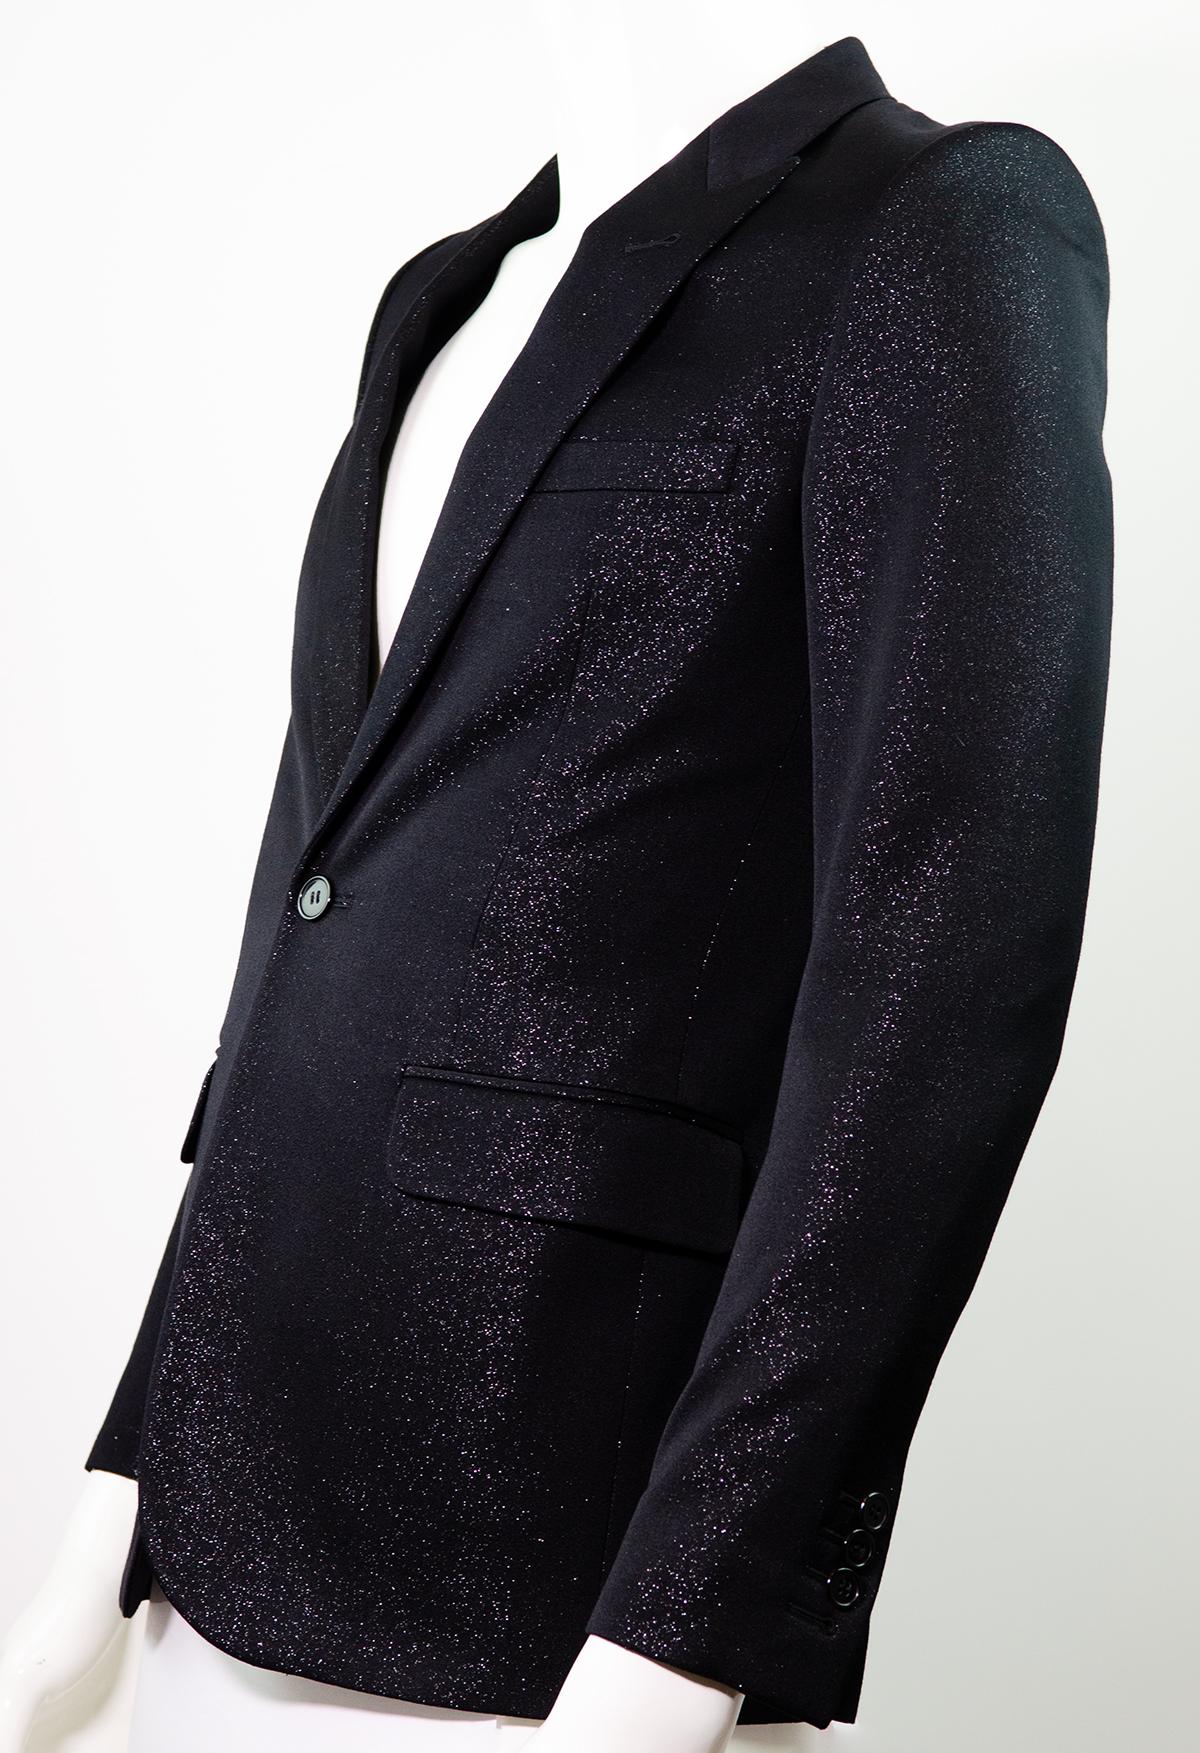 SAINT LAURENT By HEDI SLIMANE Rare F/W 2015 Black Glitter Blazer In Excellent Condition For Sale In Berlin, BE